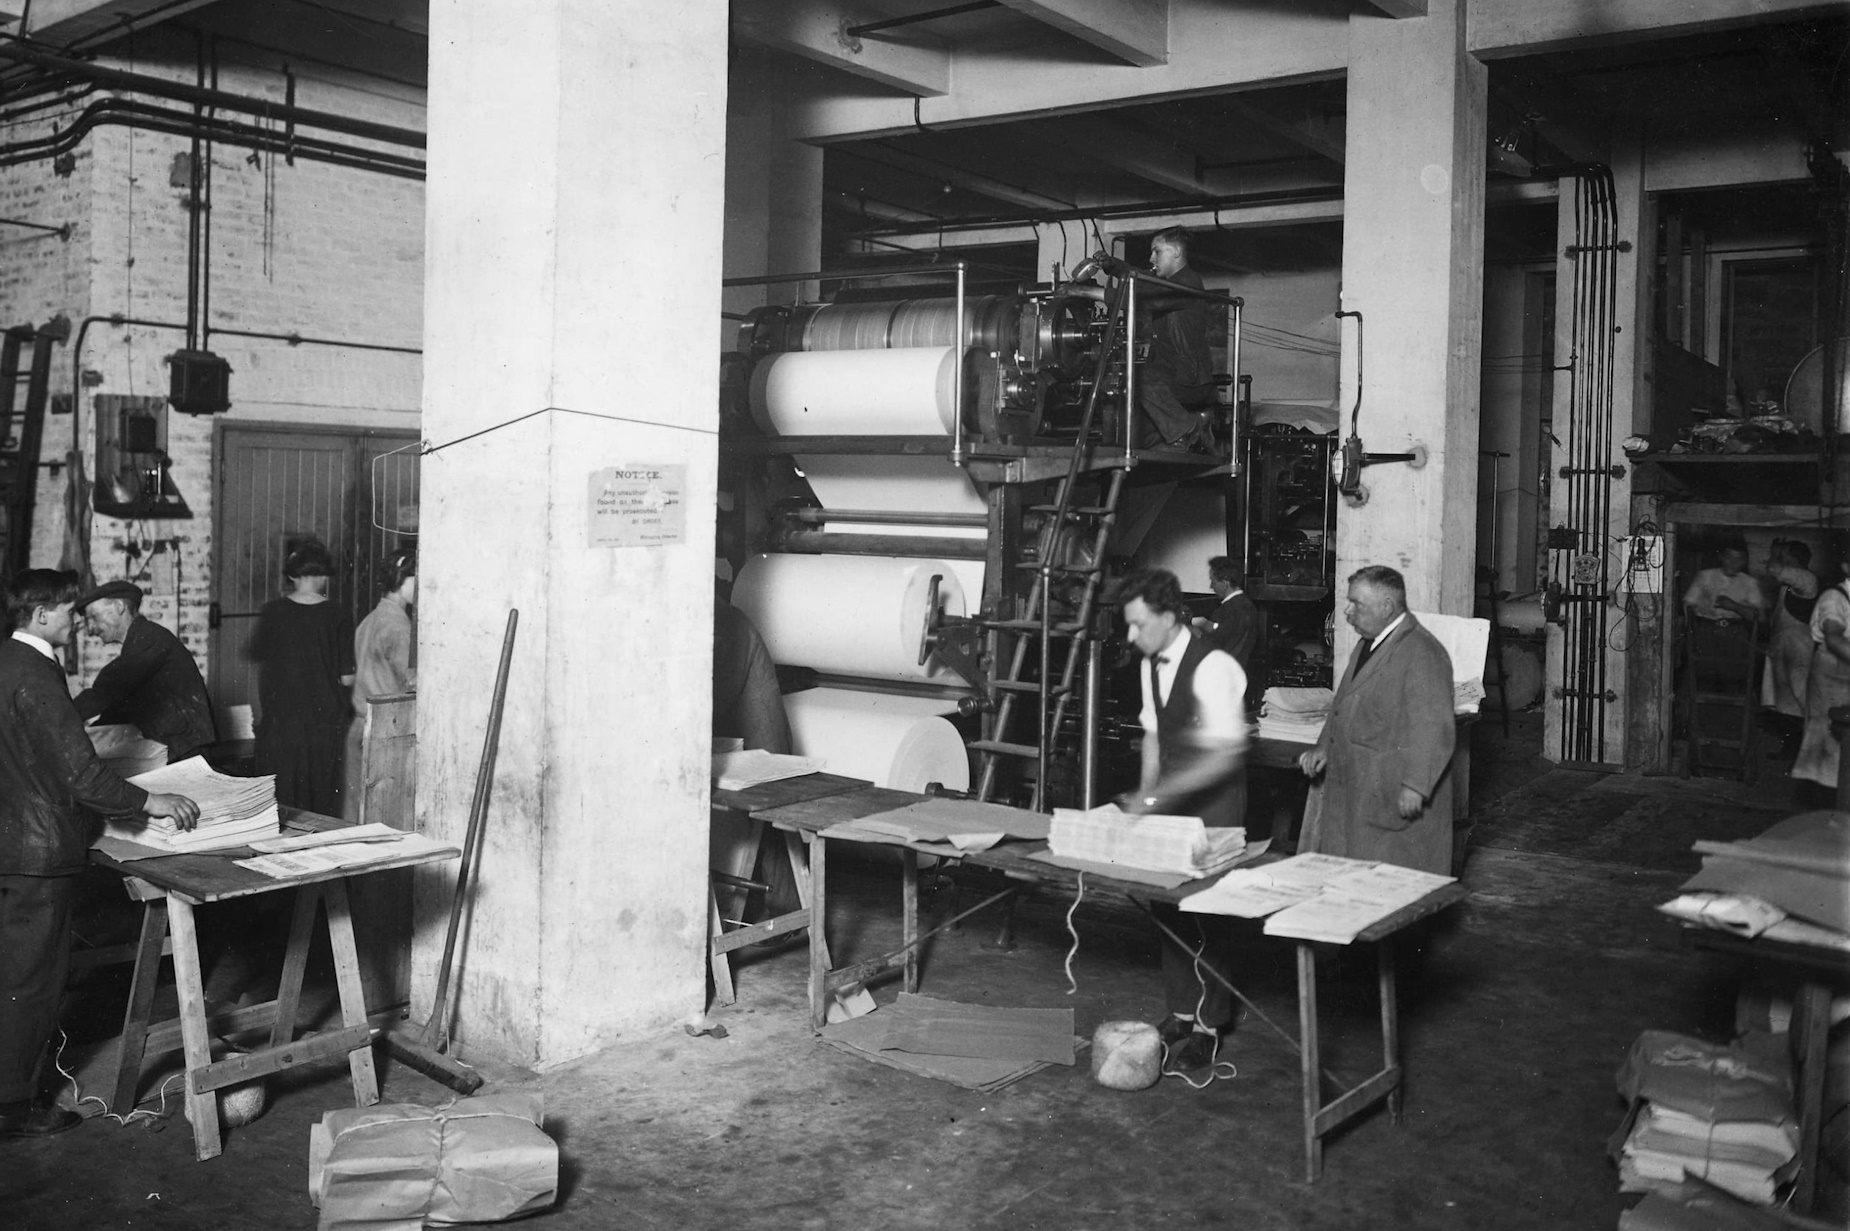 A black and white photograph of workers using printmaking machines to make newspapers in the 1930s